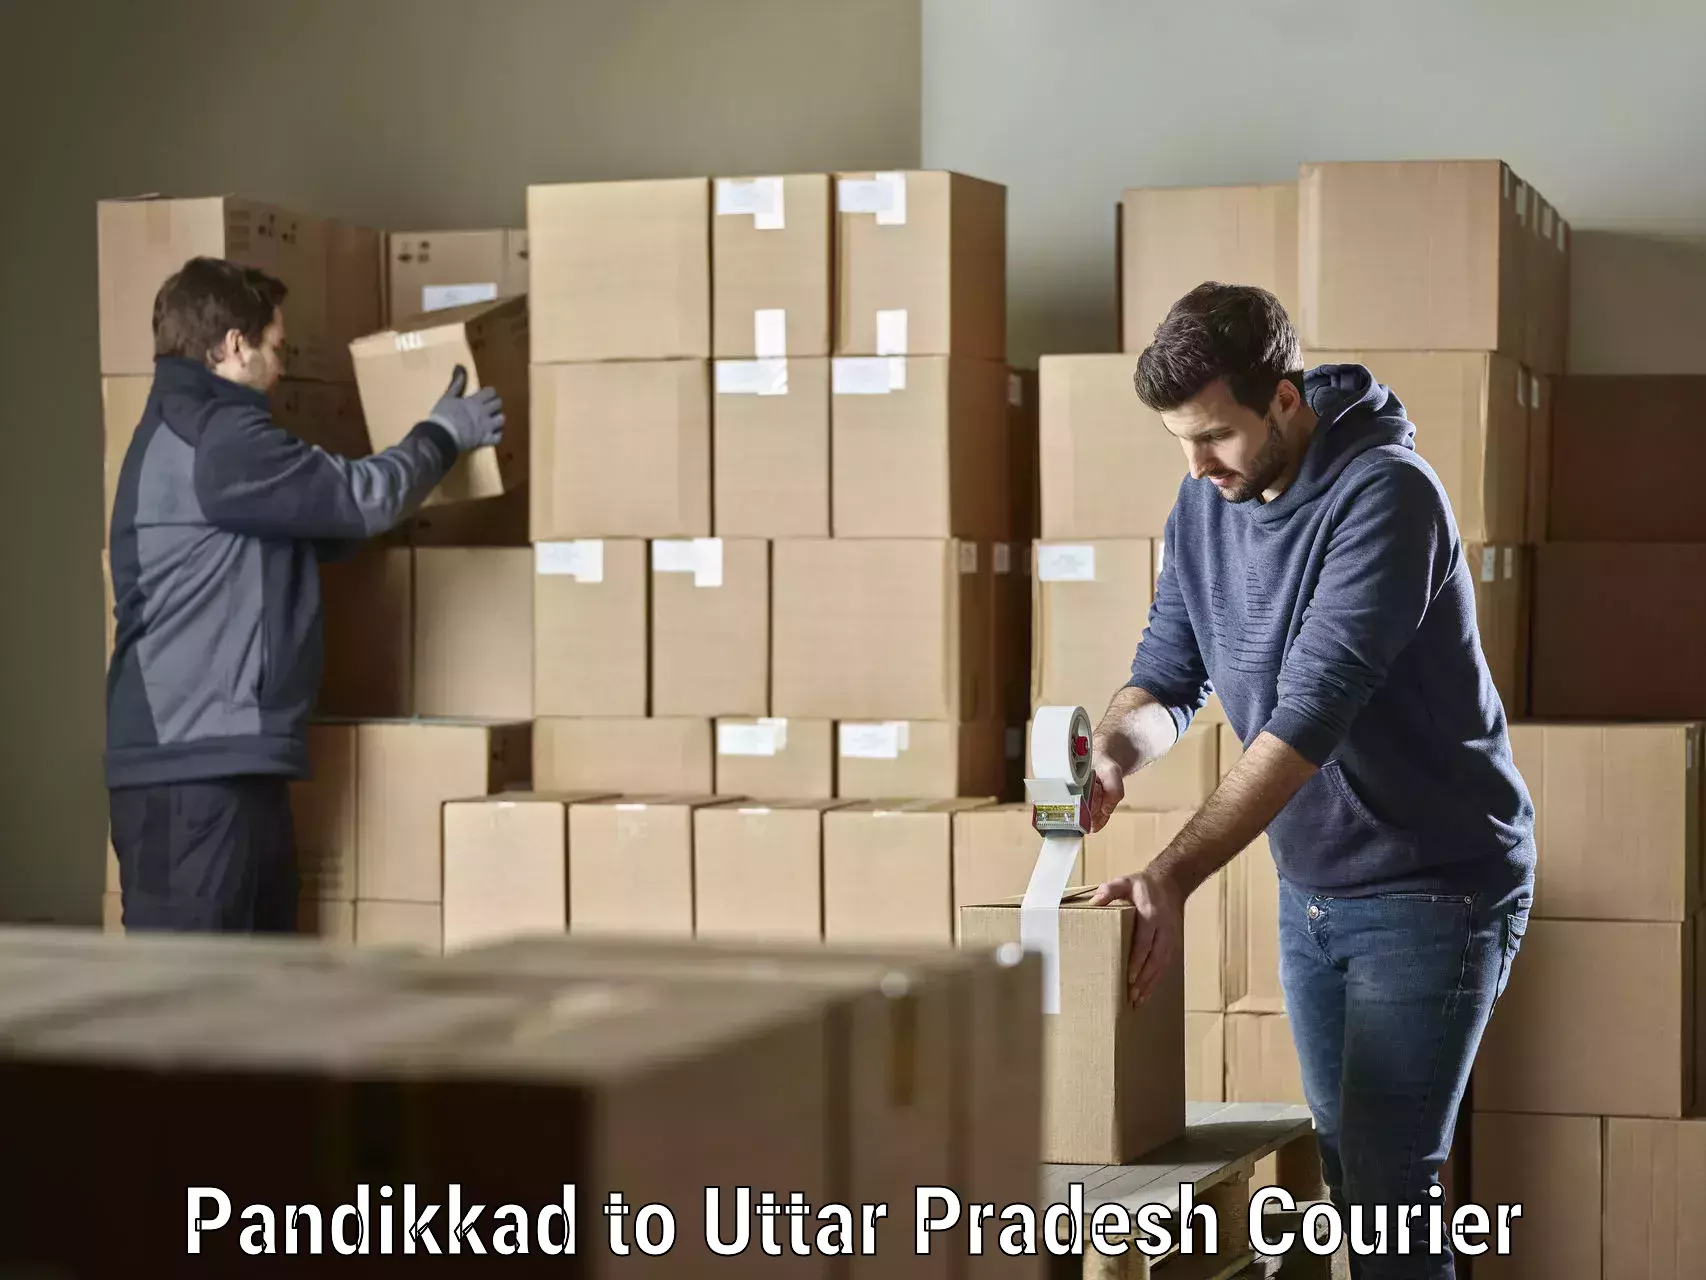 Global courier networks Pandikkad to Rampur